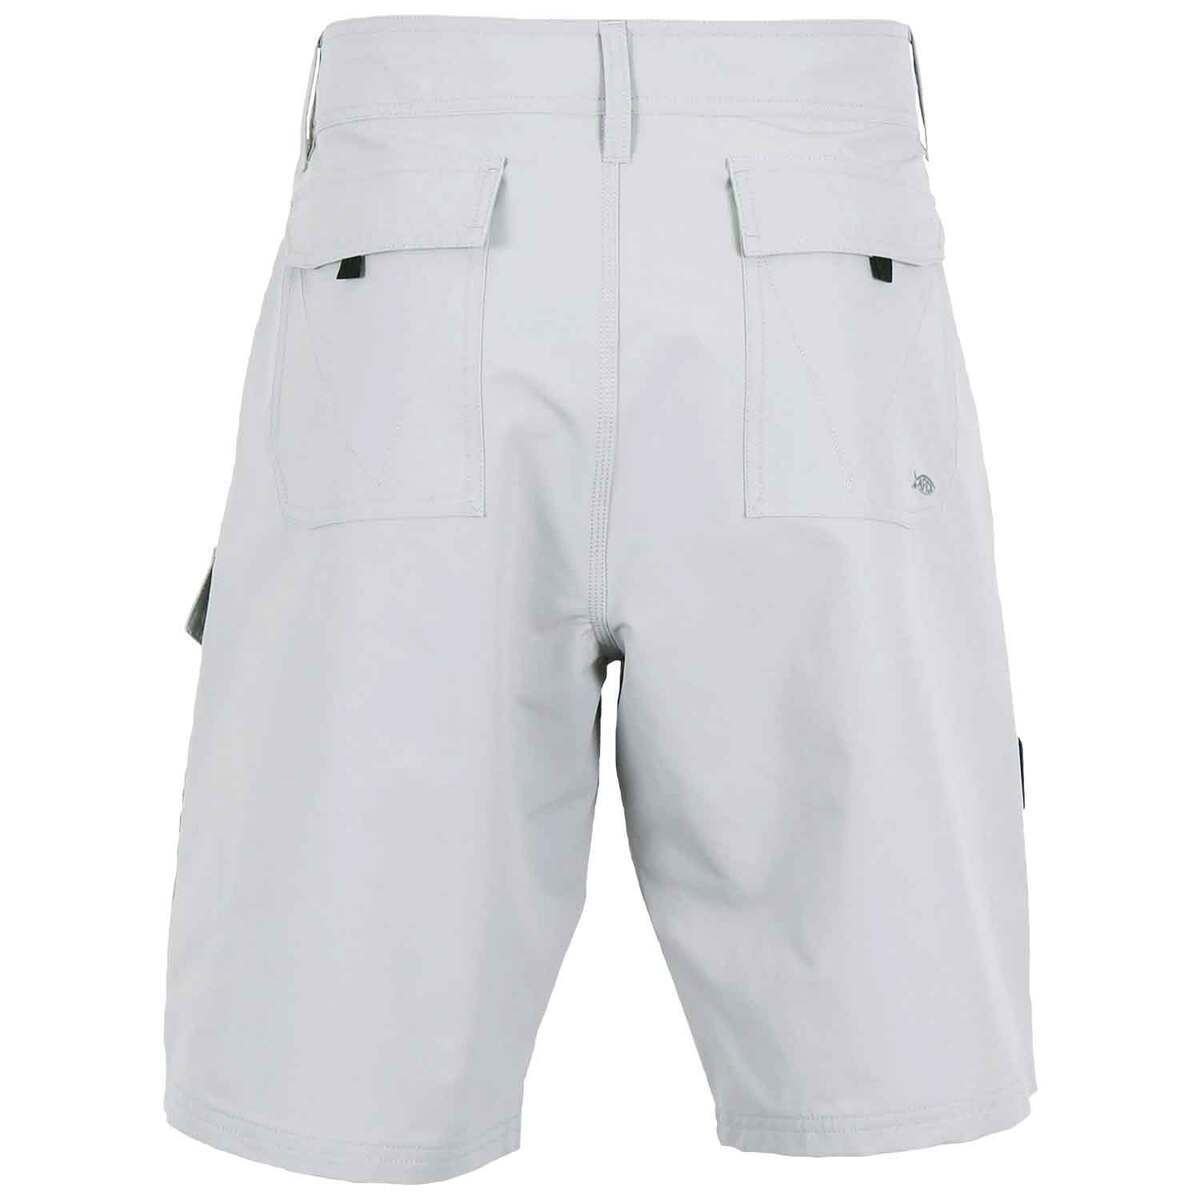 AFTCO Men's Stealth Active Fit Fishing Shorts | Sportsman's Warehouse